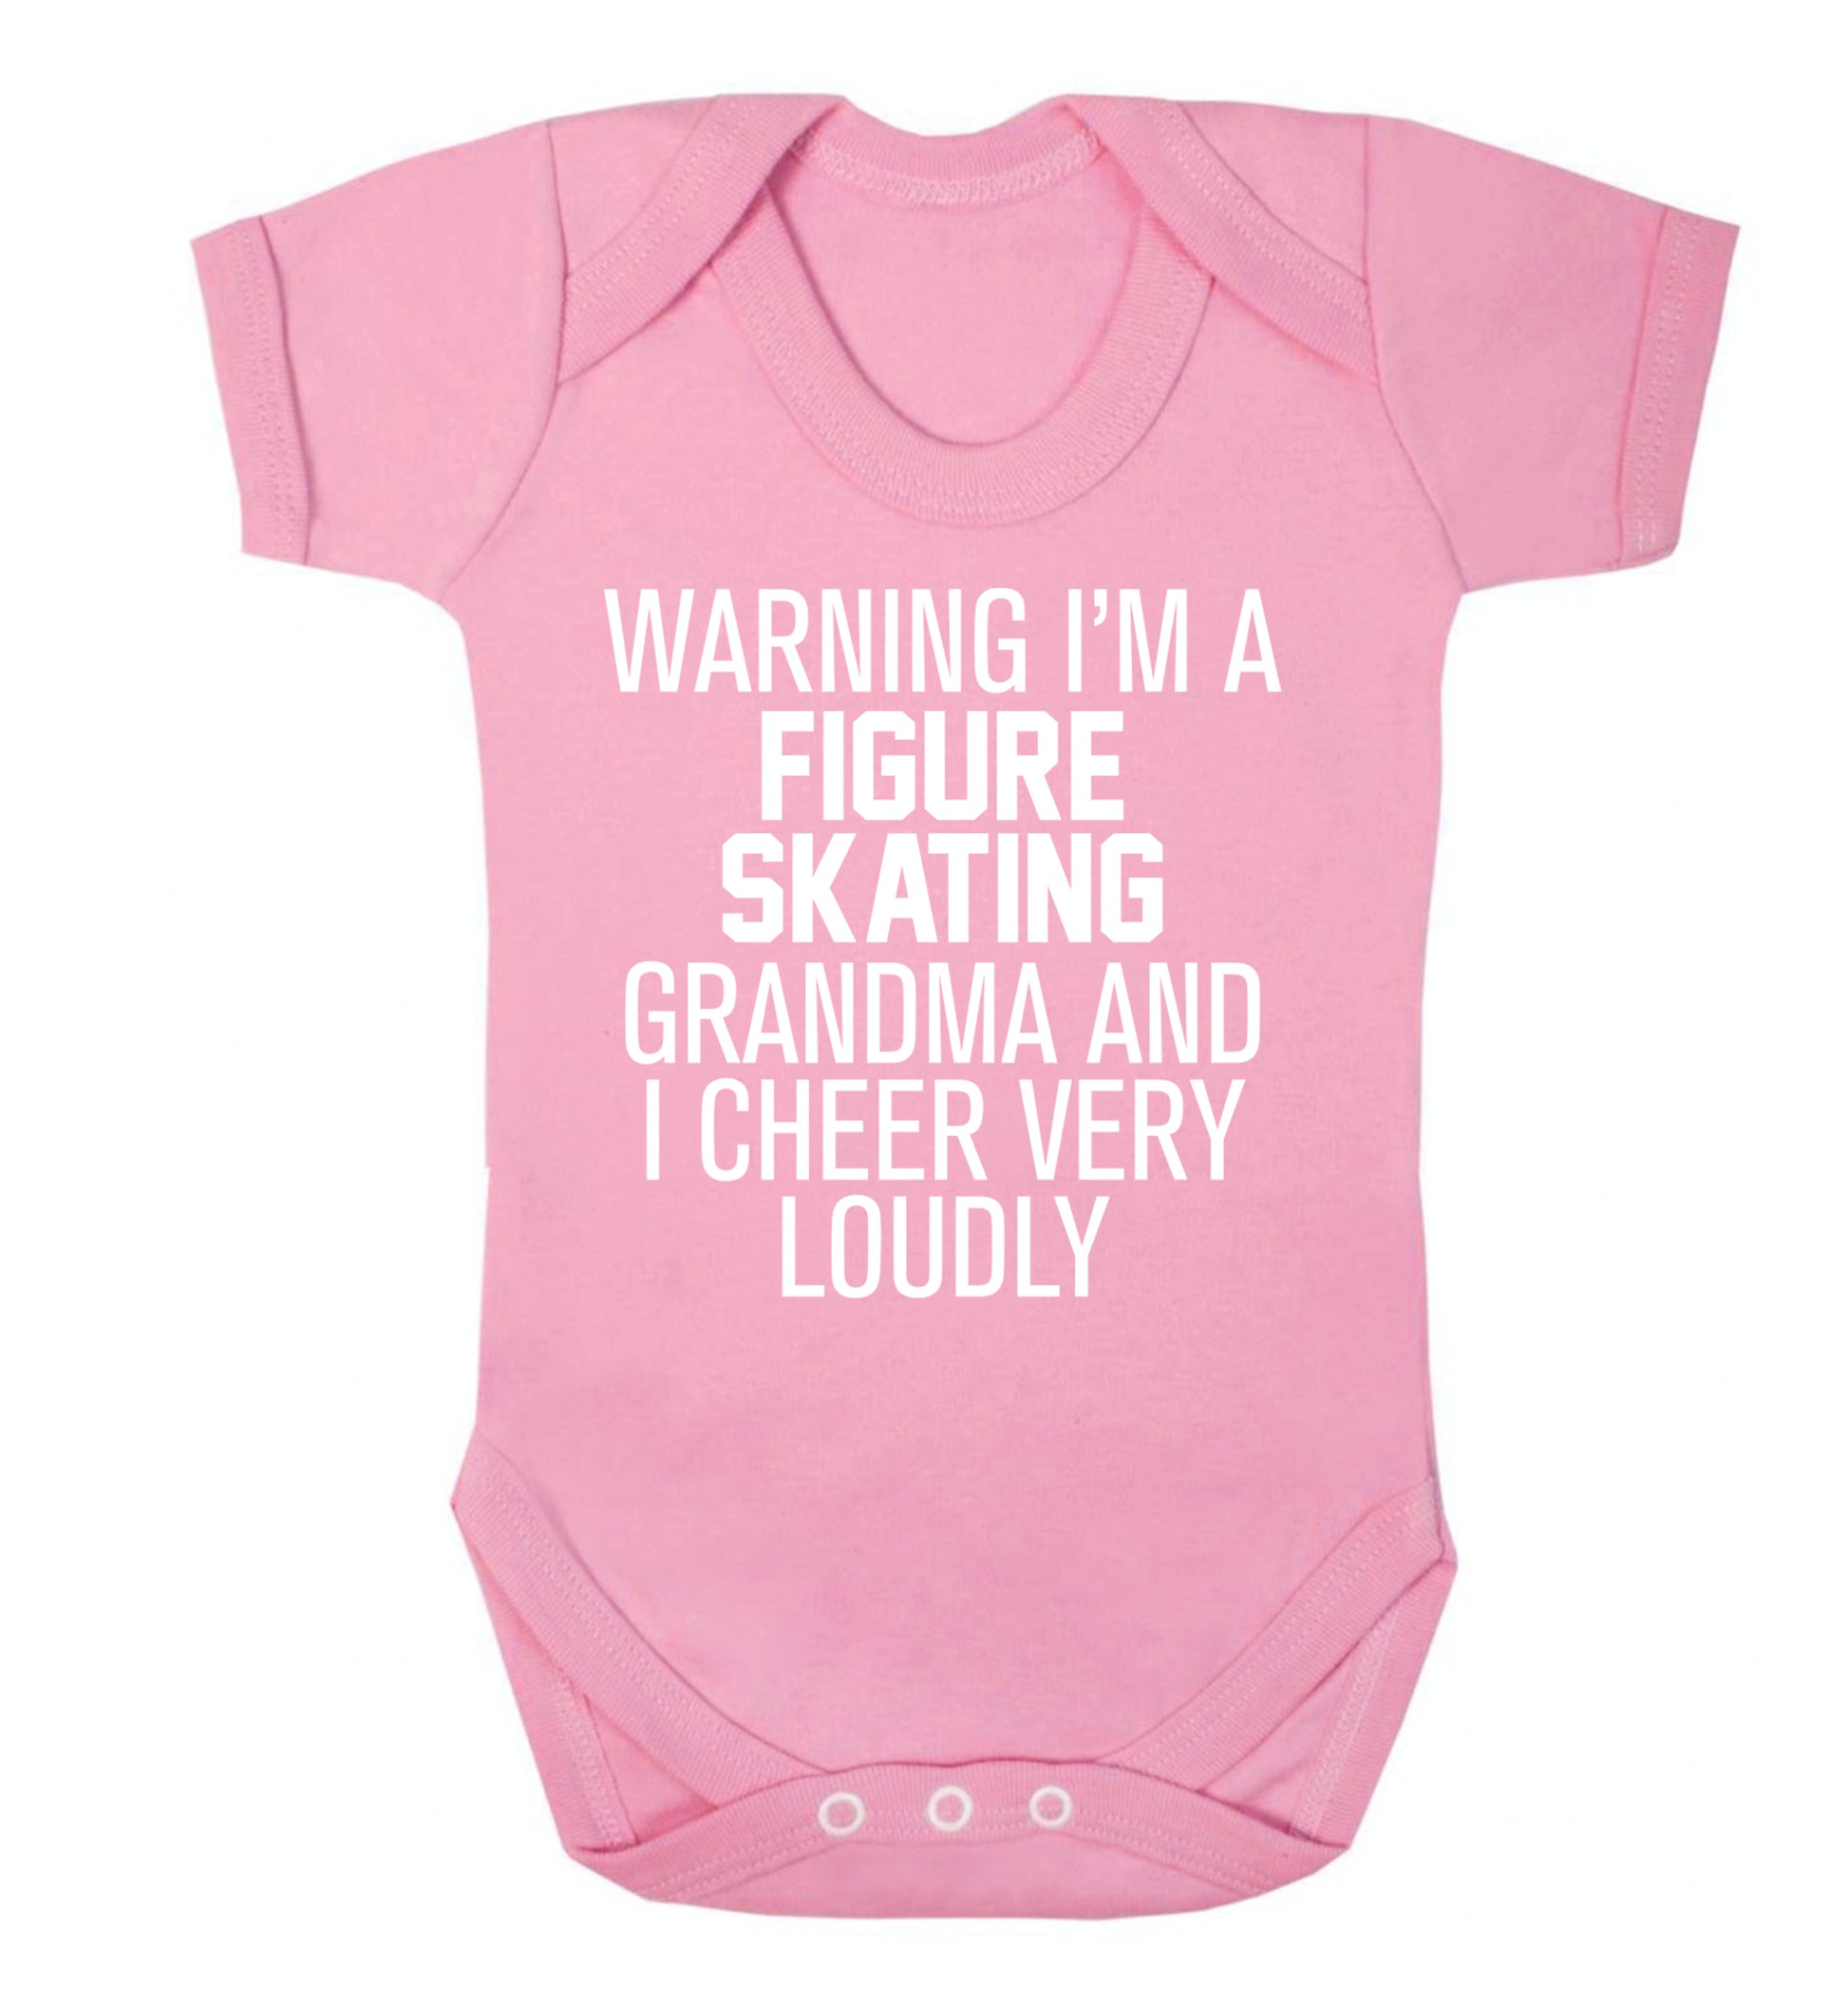 Warning I'm a figure skating grandma and I cheer very loudly Baby Vest pale pink 18-24 months